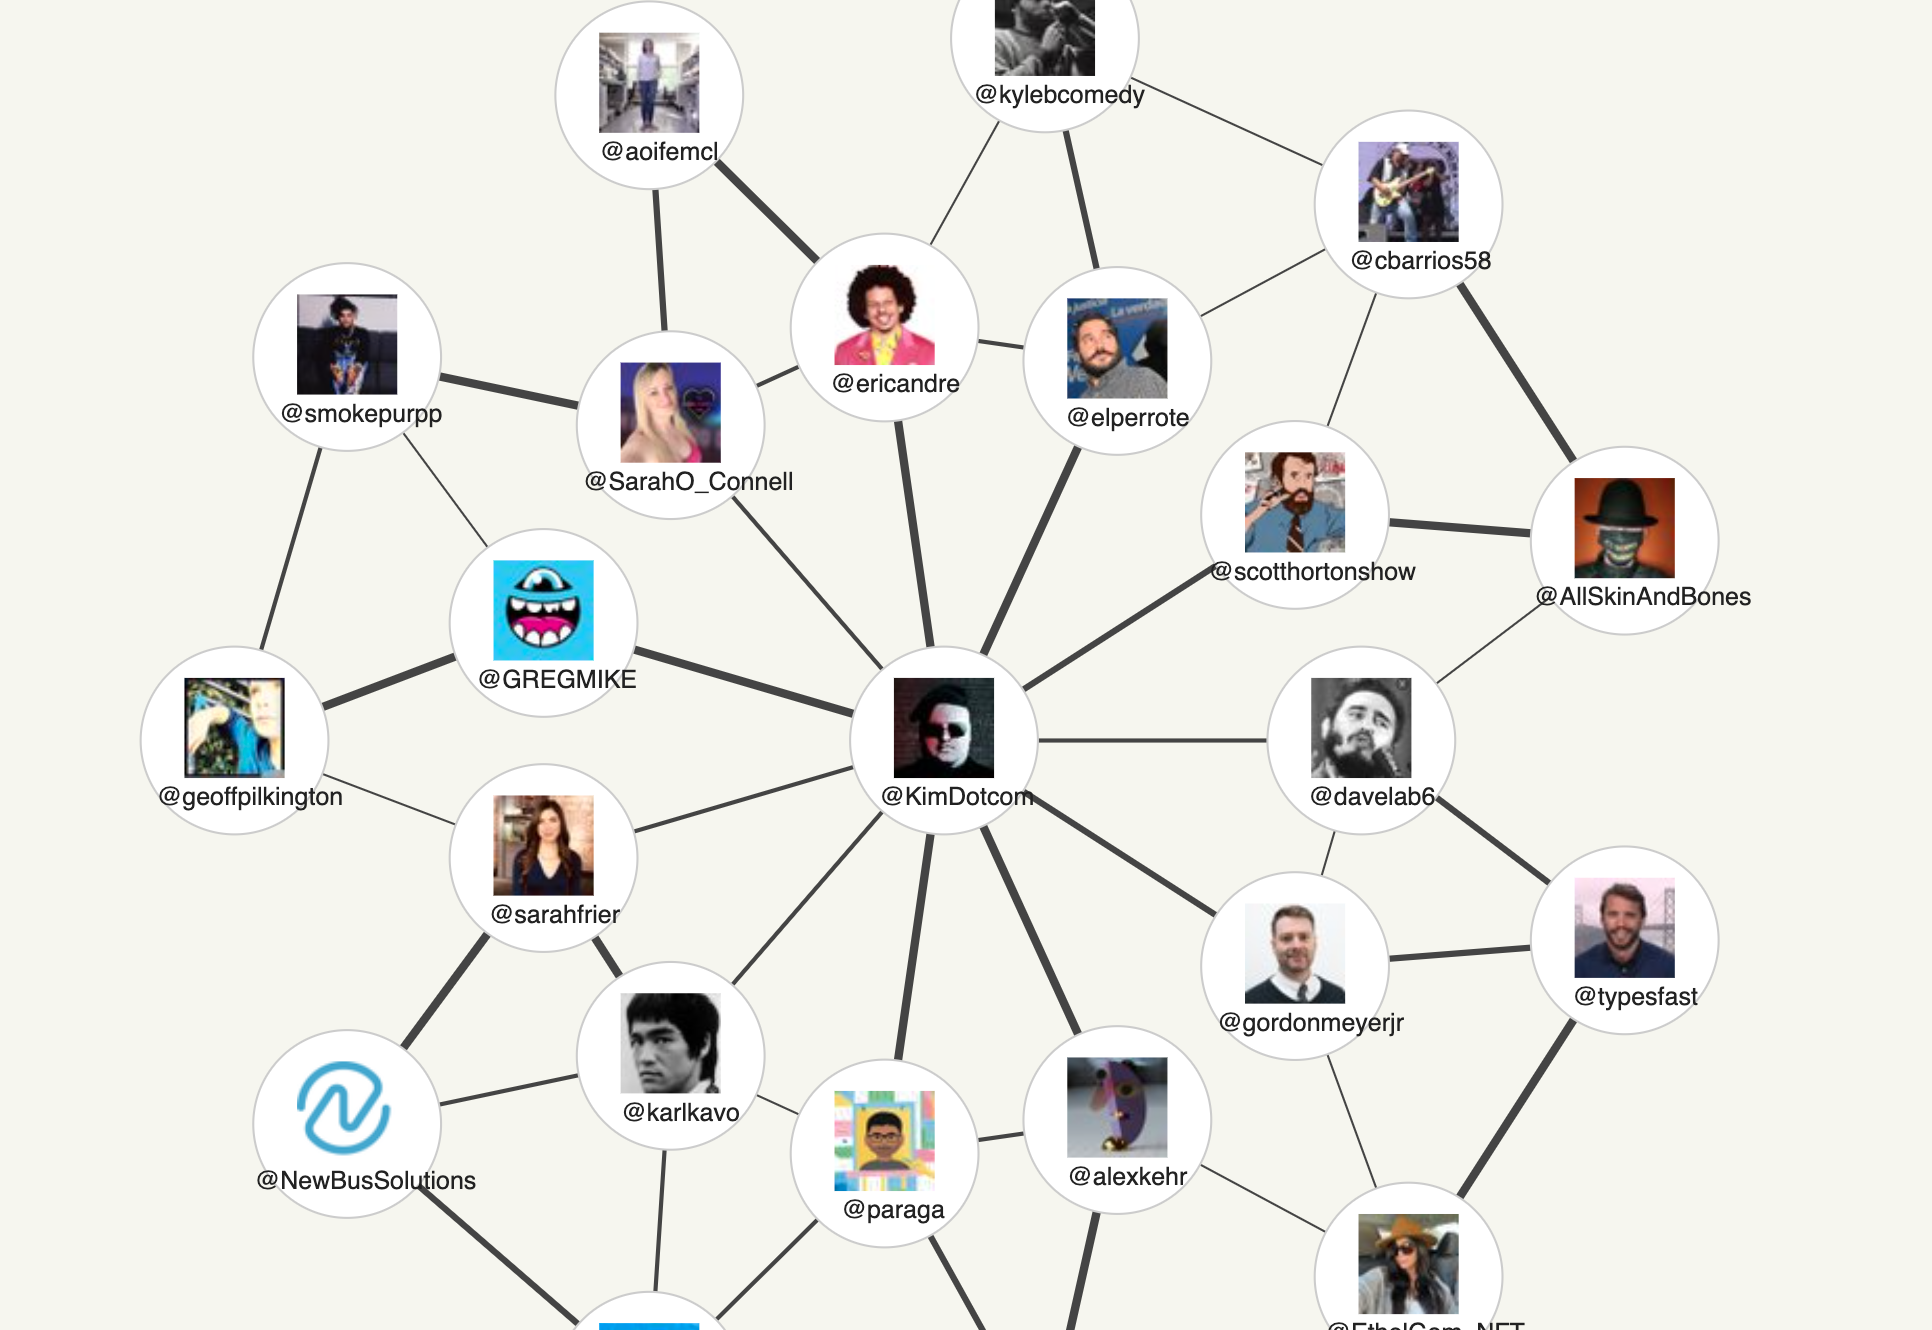 Another example of a social graph display